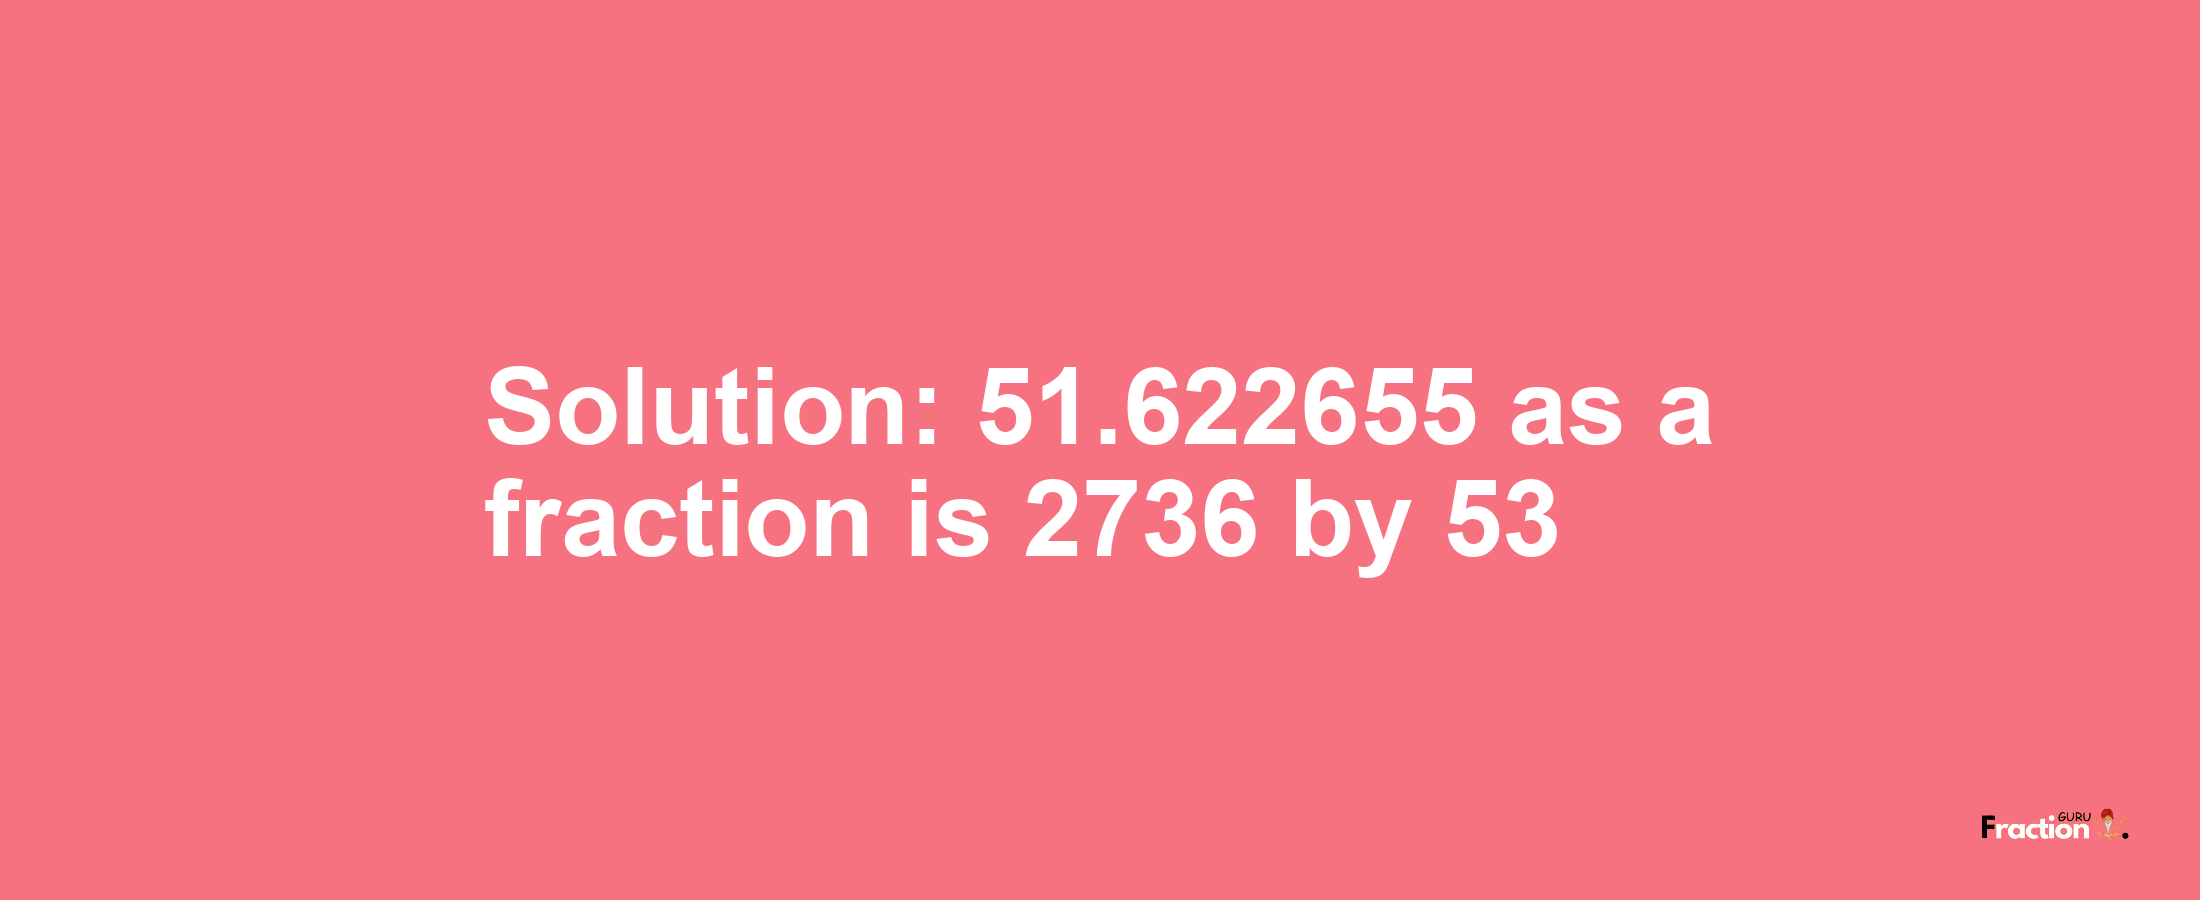 Solution:51.622655 as a fraction is 2736/53